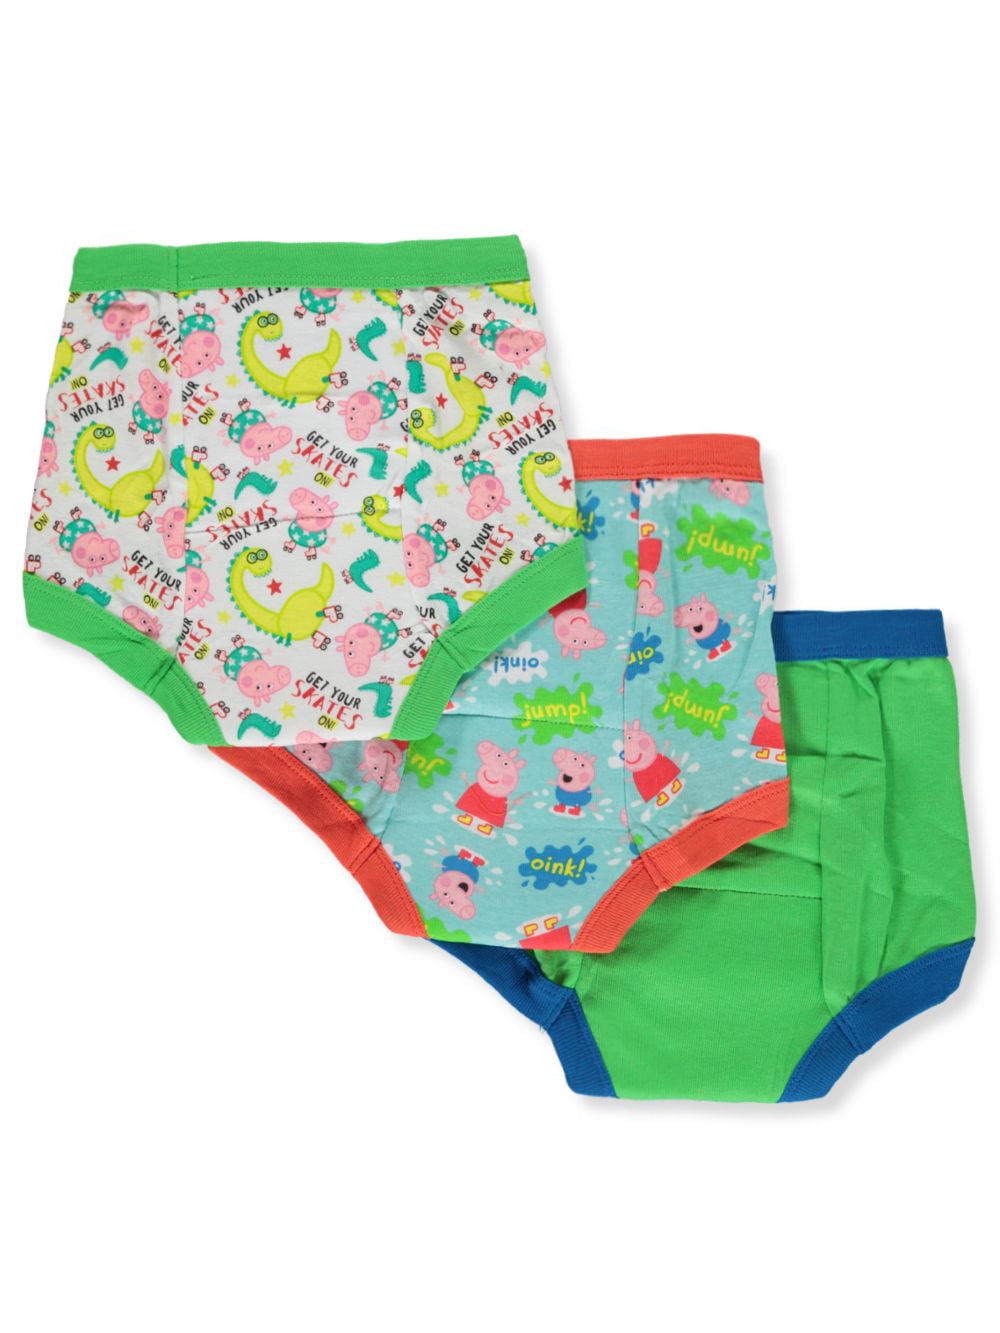  Peppa Pig Boys George Pig Underwear Pack of 5 Briefs for Kids  Multicolor 2T : Clothing, Shoes & Jewelry